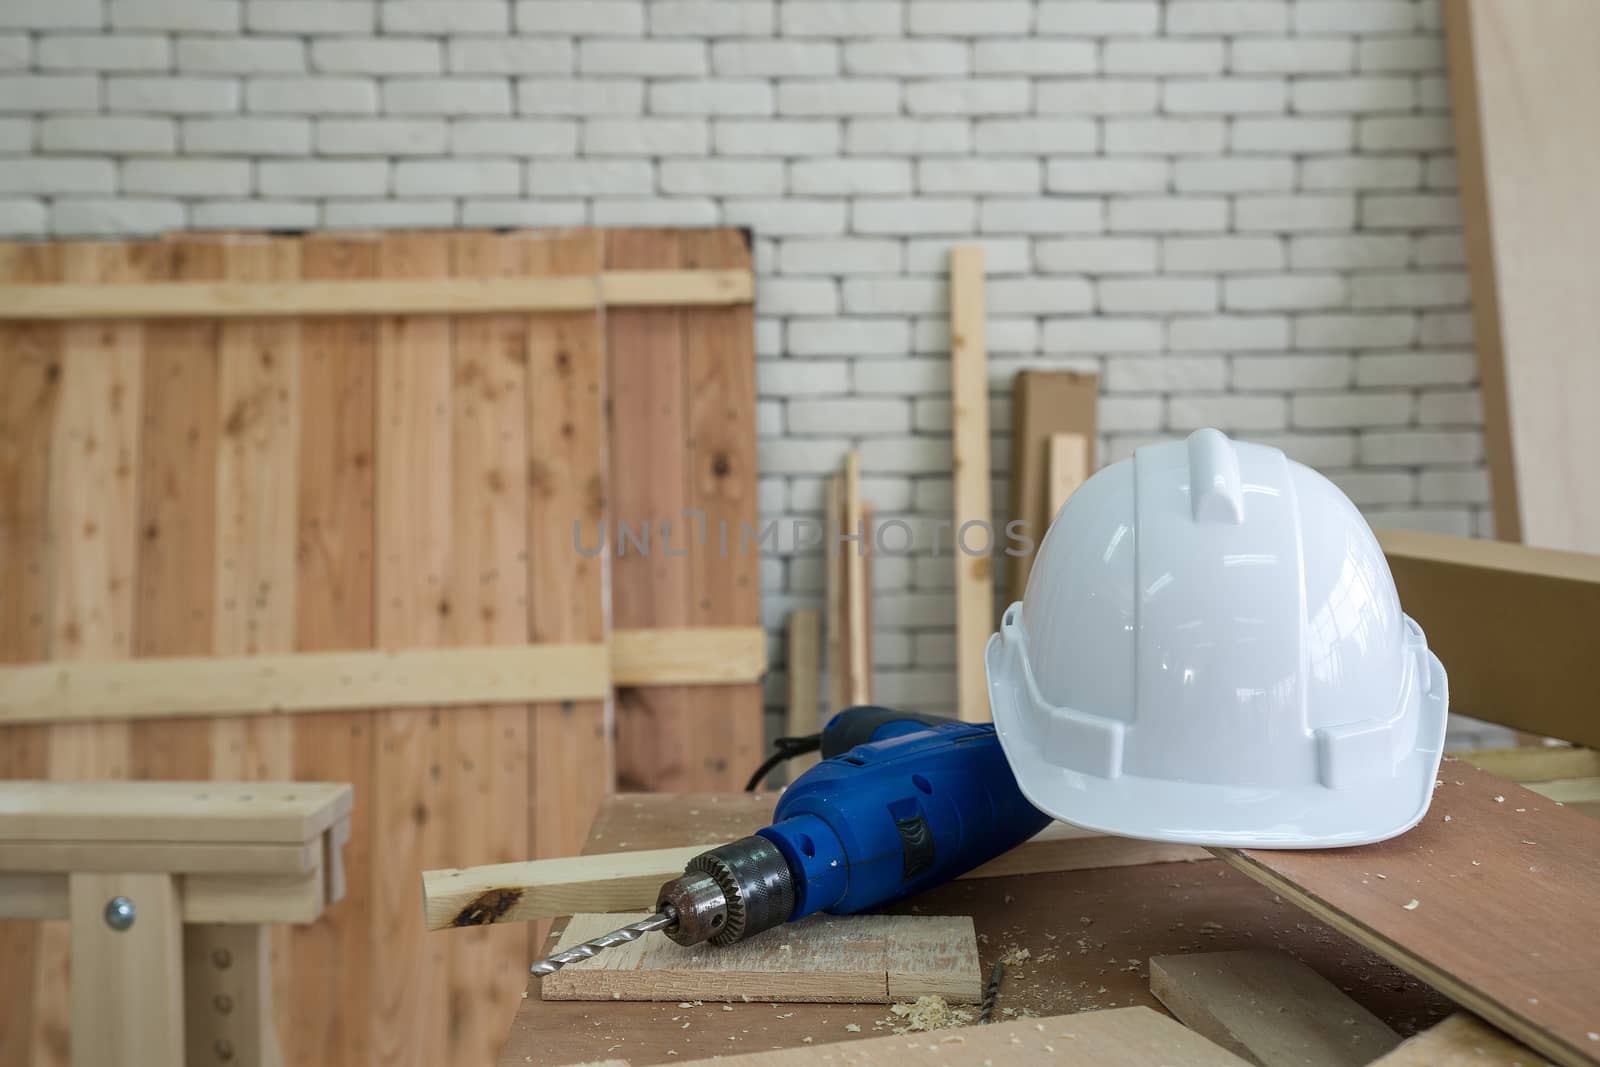 The white construction helmet and the blue electric drill were left aside during lunch time brake. A desk full of hand tools and wood piles. Morning work atmosphere in the workshop room.